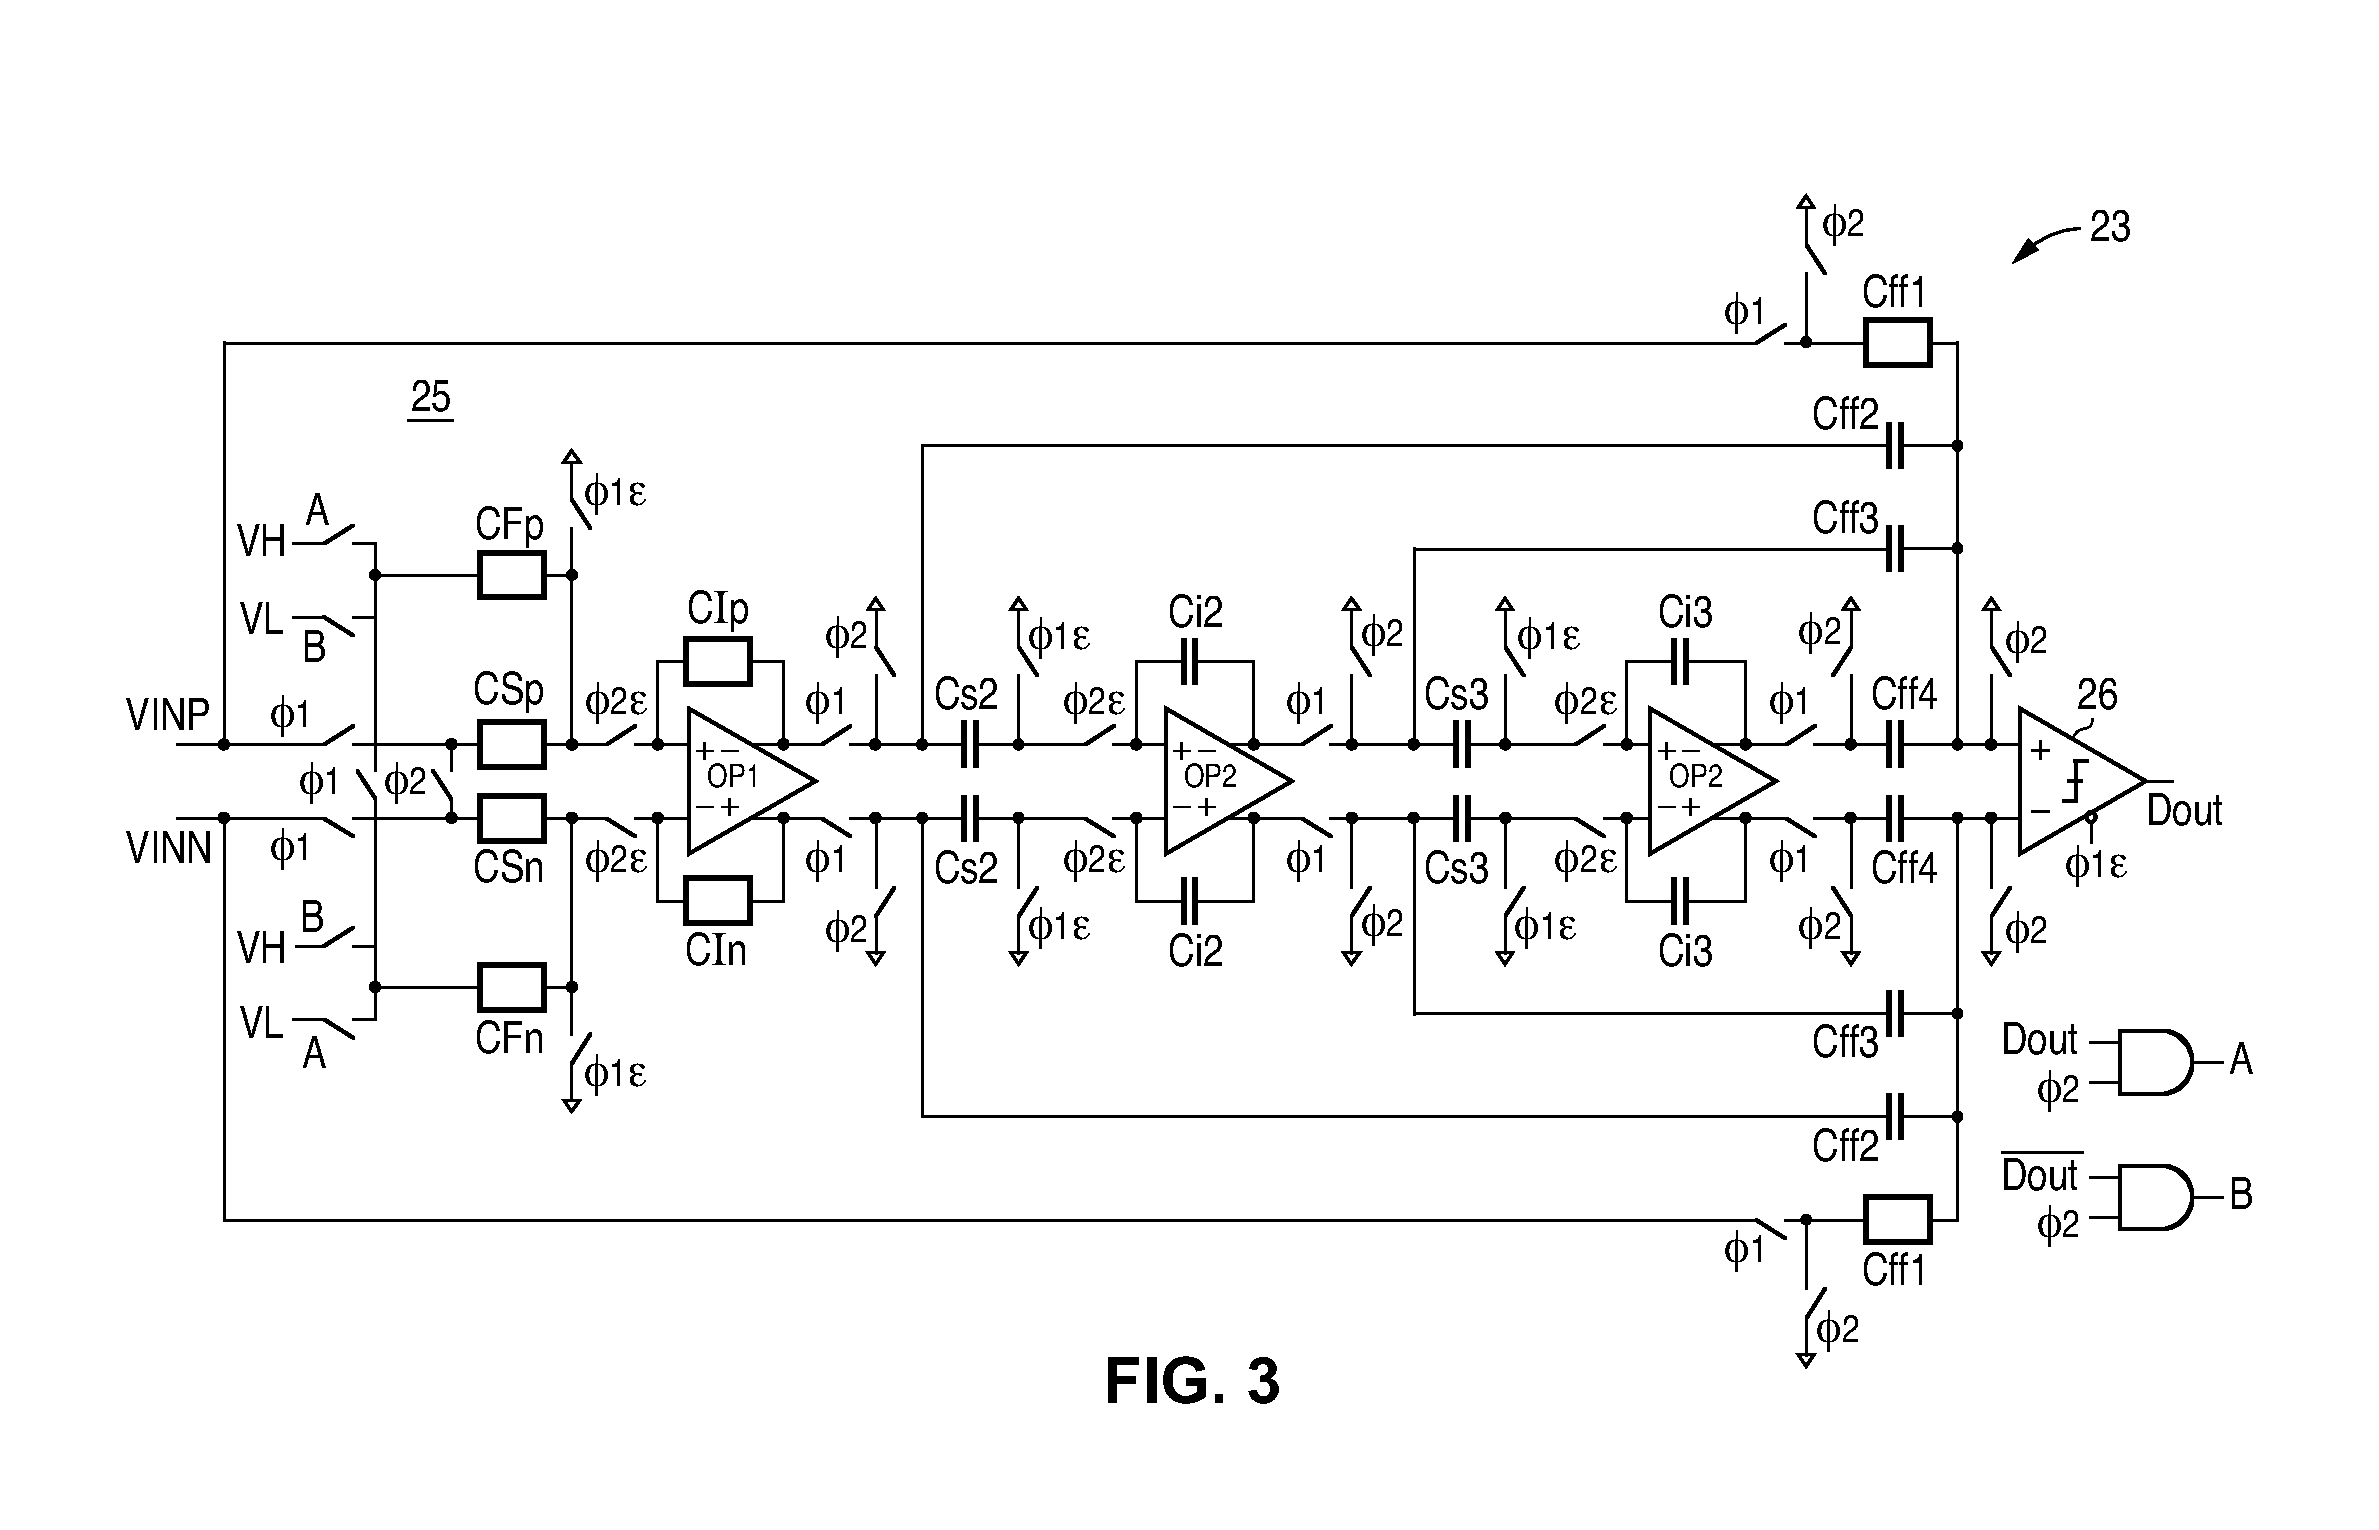 Capacitor rotation method for removing gain error in sigma-delta analog-to-digital converters